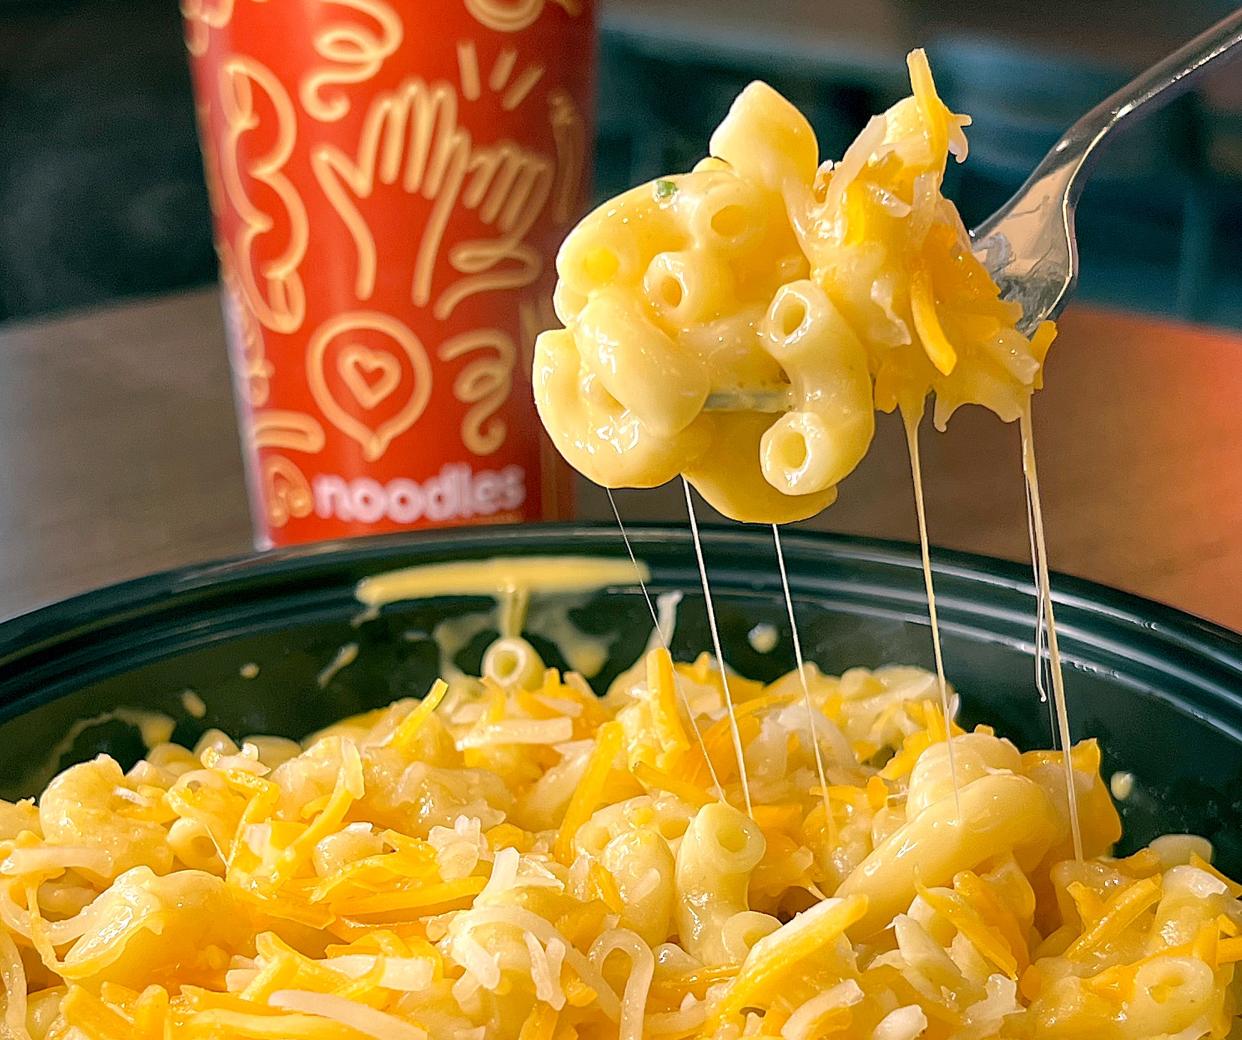 A cheesy order of Wisconsin Mac & Cheese from Noodles & Company.